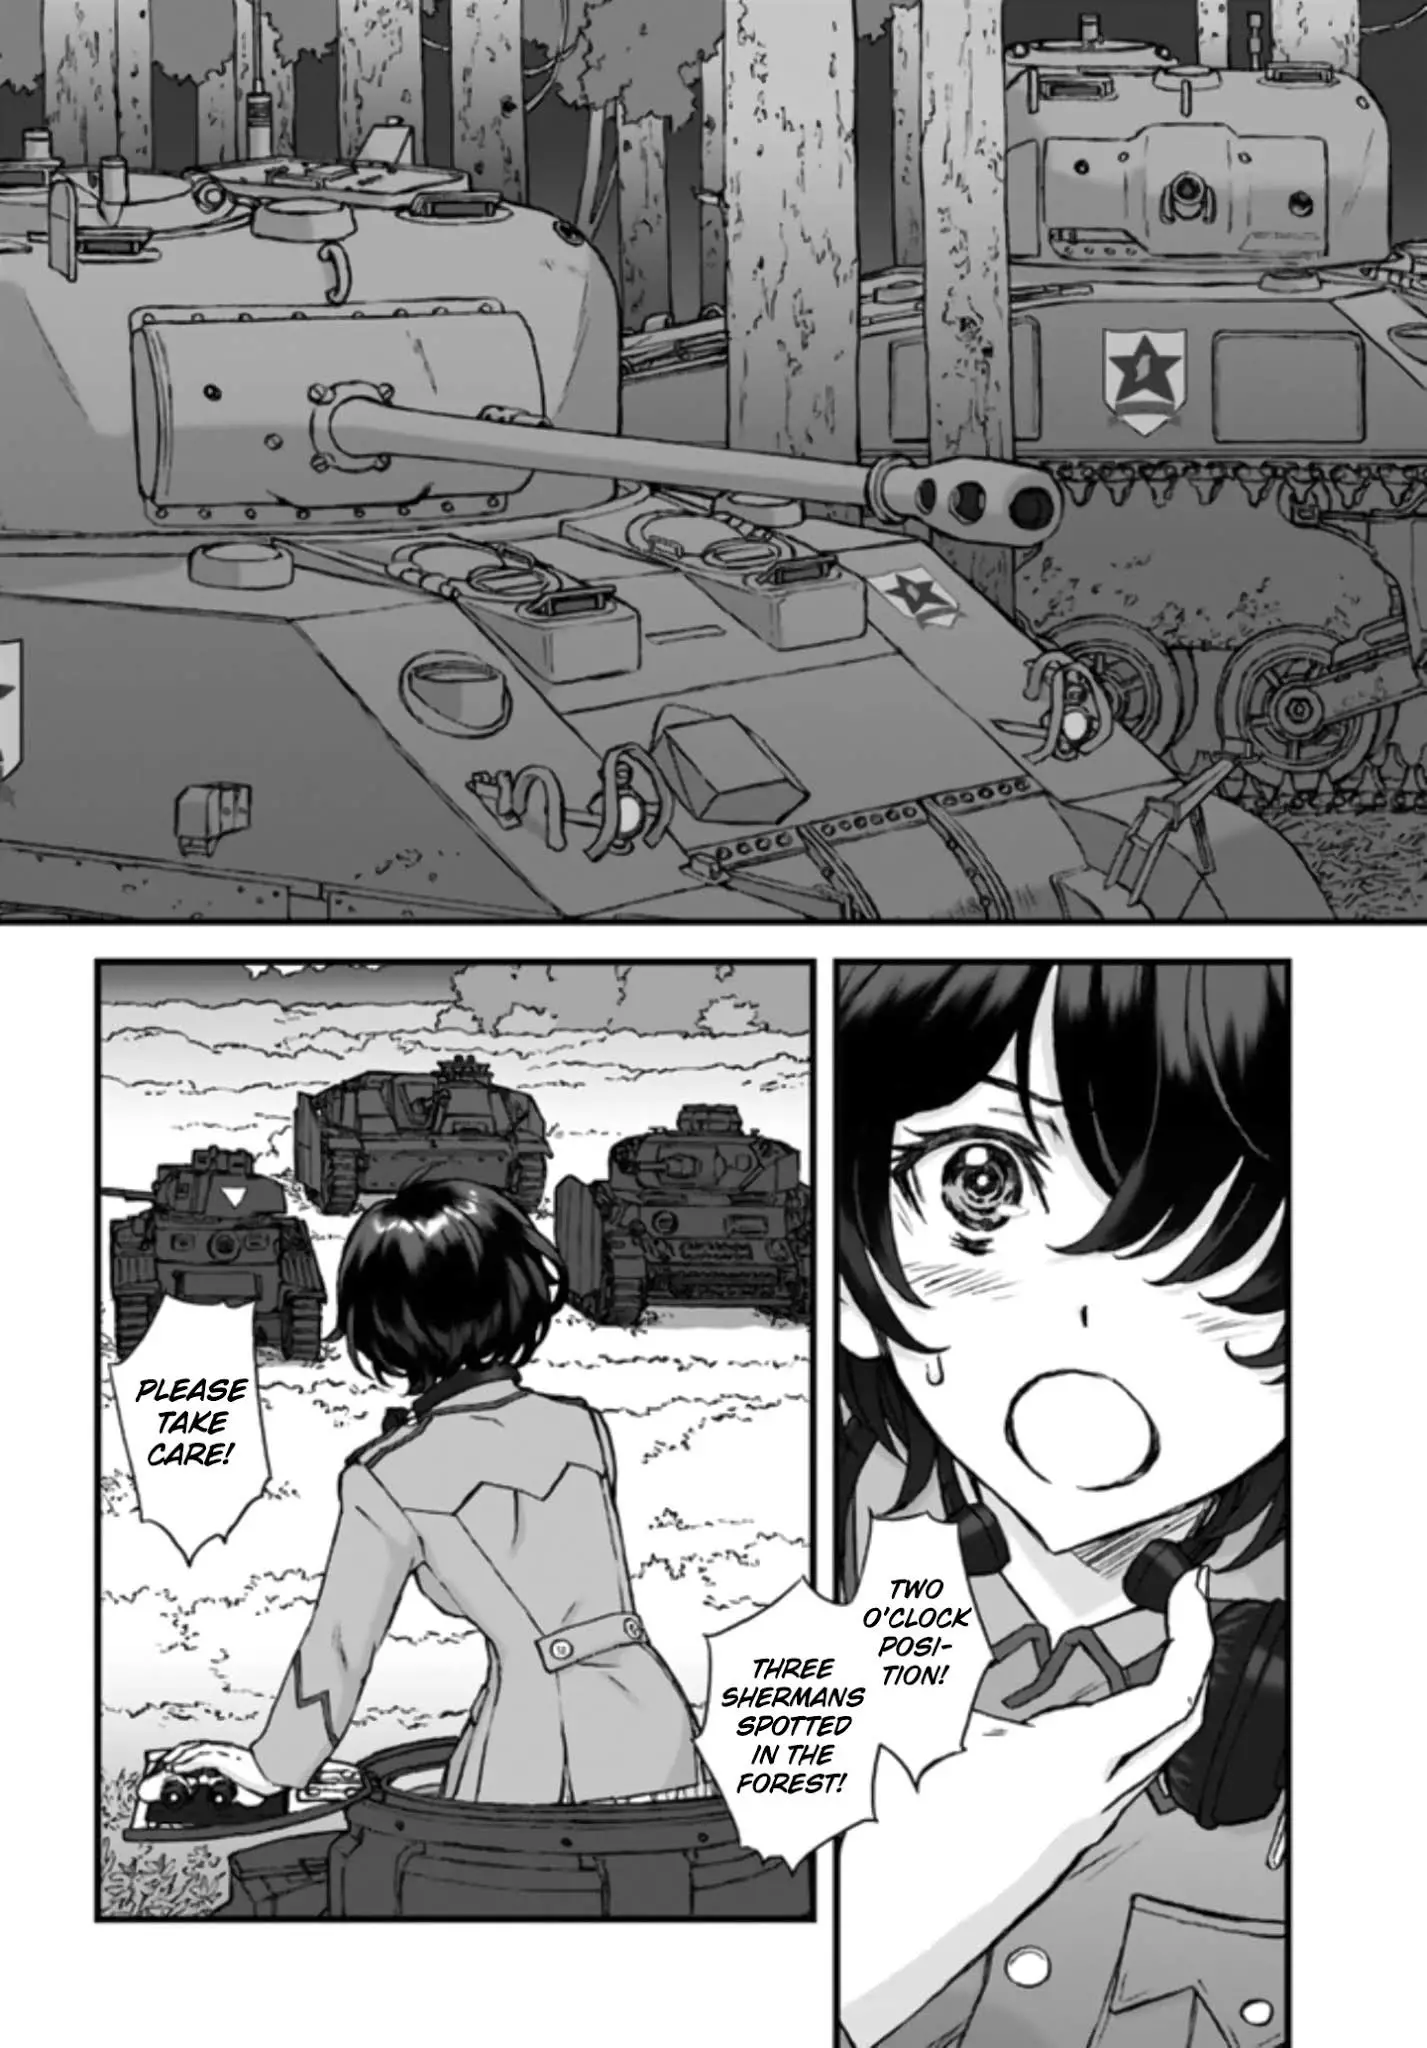 Girls Und Panzer - The Fir Tree And The Iron-Winged Witch - 4 page 6